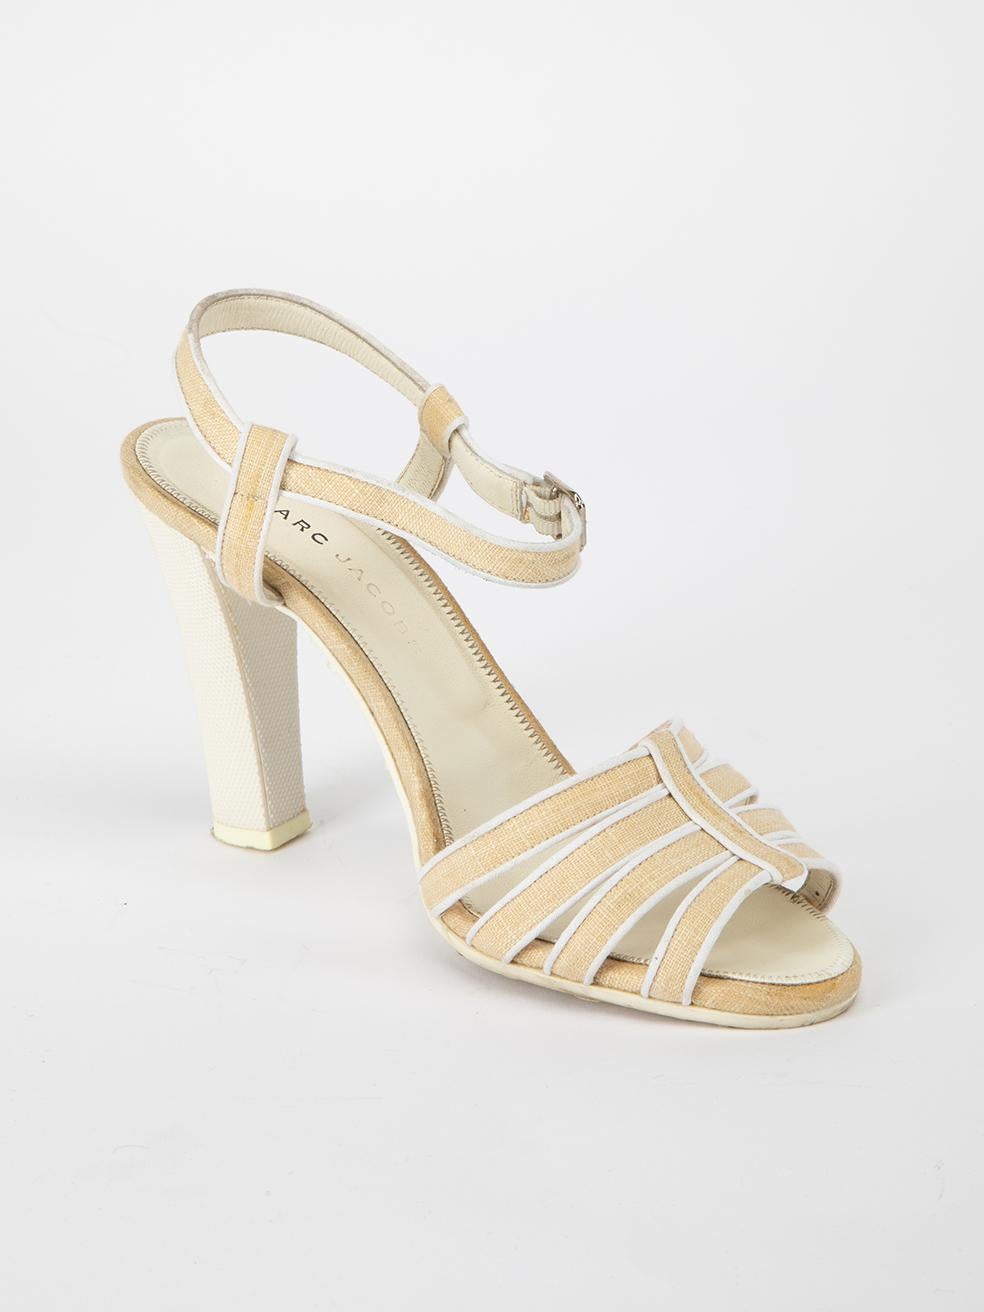 CONDITION is Very good. Minimal wear to shoes is evident. Discolouring can be seen to both ankle straps on this used Marc Jacobs designer resale item. This item comes with original dust bag and shoe box. 
 
 Details
  Beige
 Linen
 Strappy sandals
